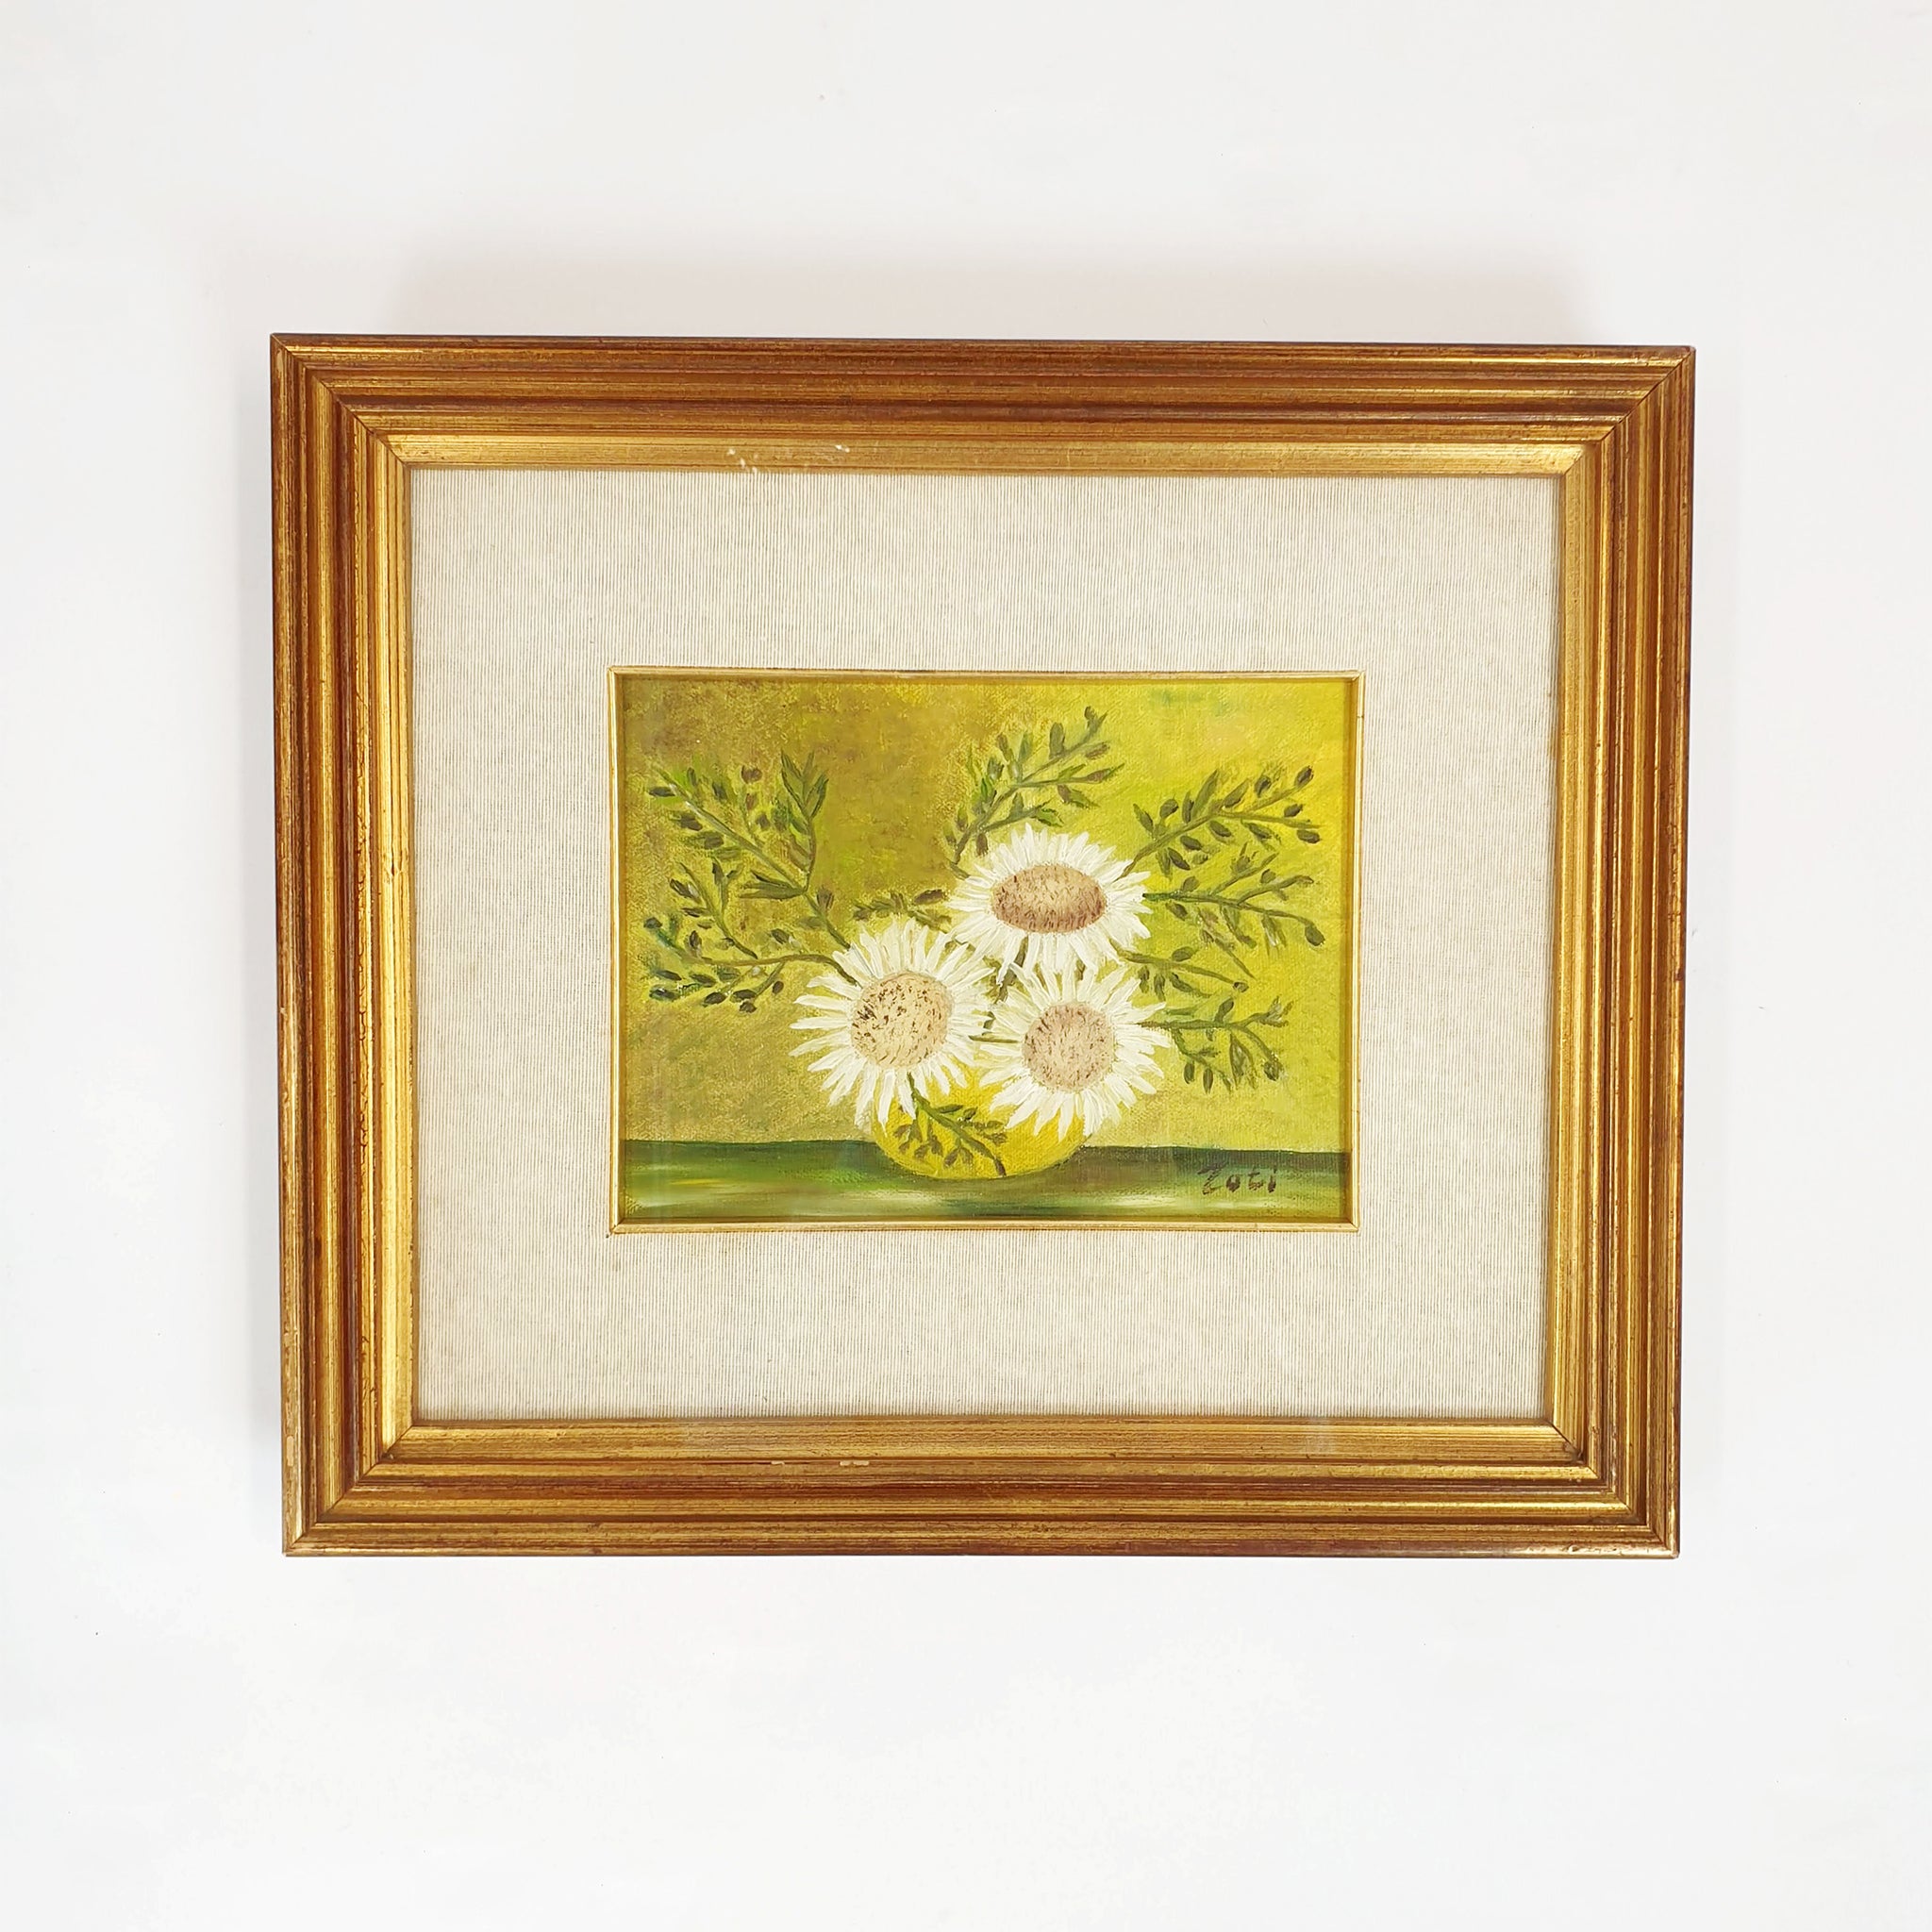 1976 oil painting of flowers by Zoti